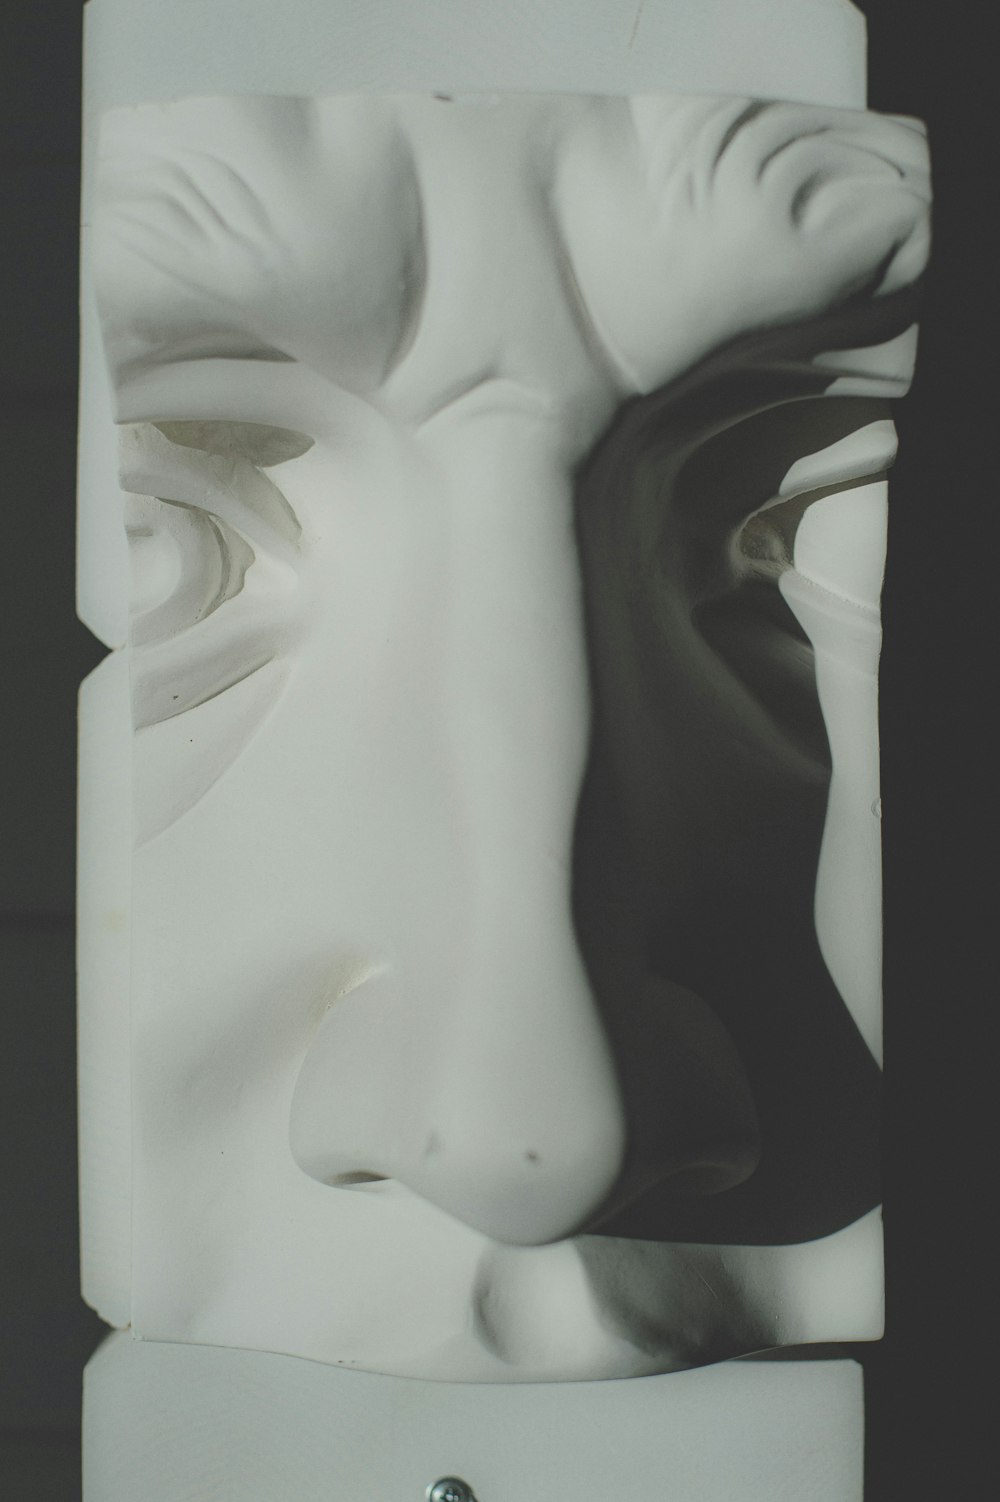 a close up of a sculpture of a person's face